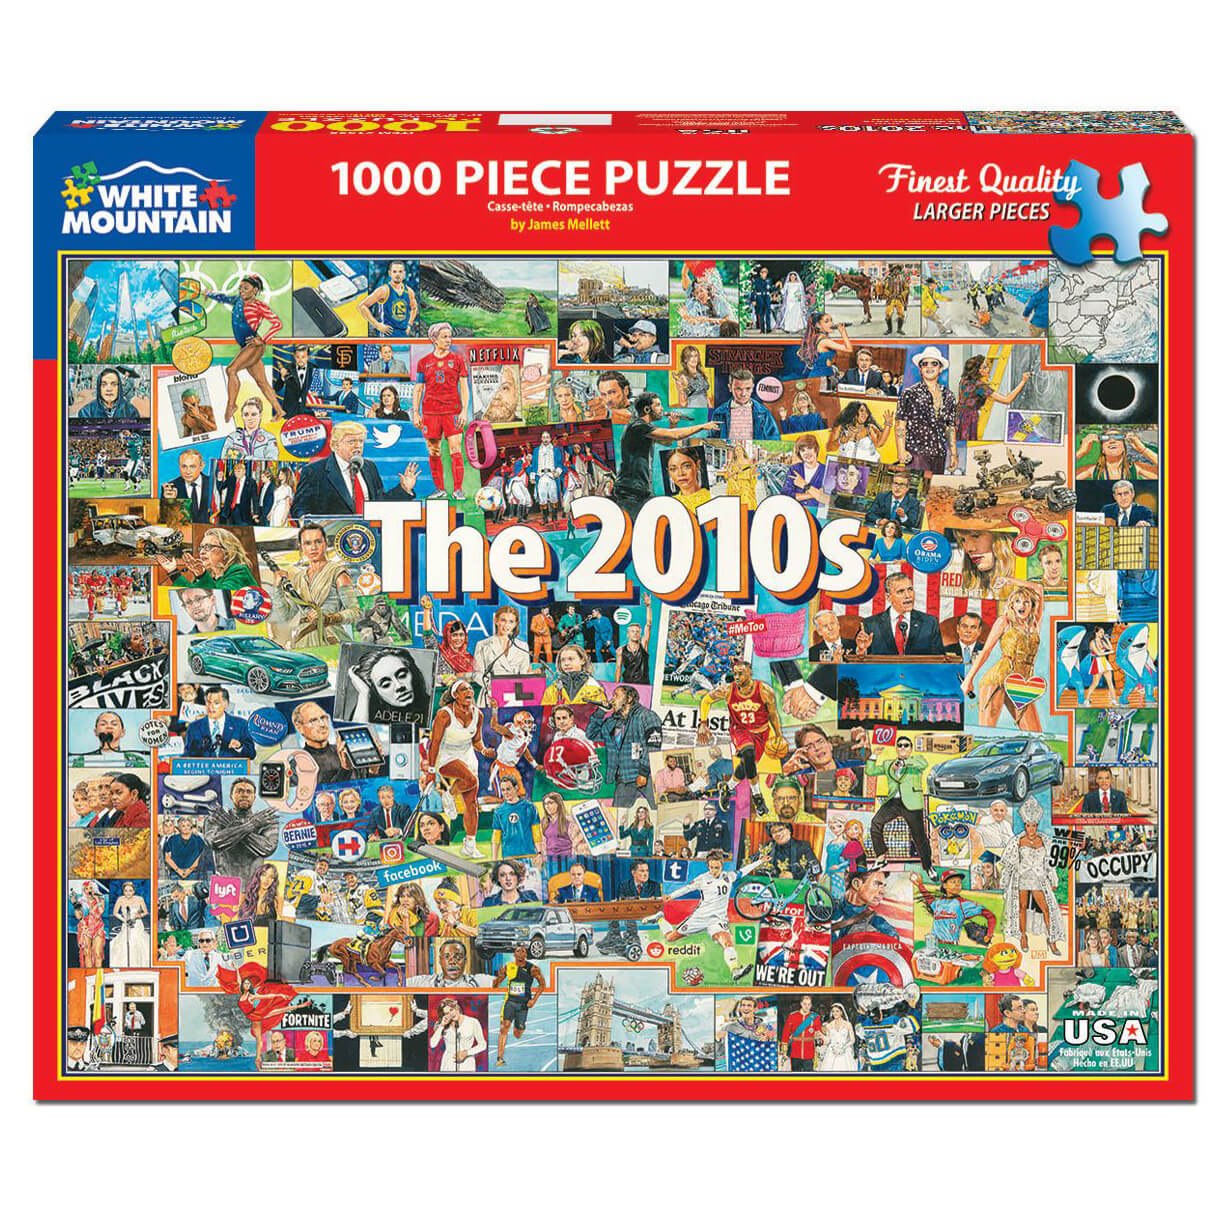 White Mountain Puzzles The 2010s 1000 Piece Jigsaw Puzzle